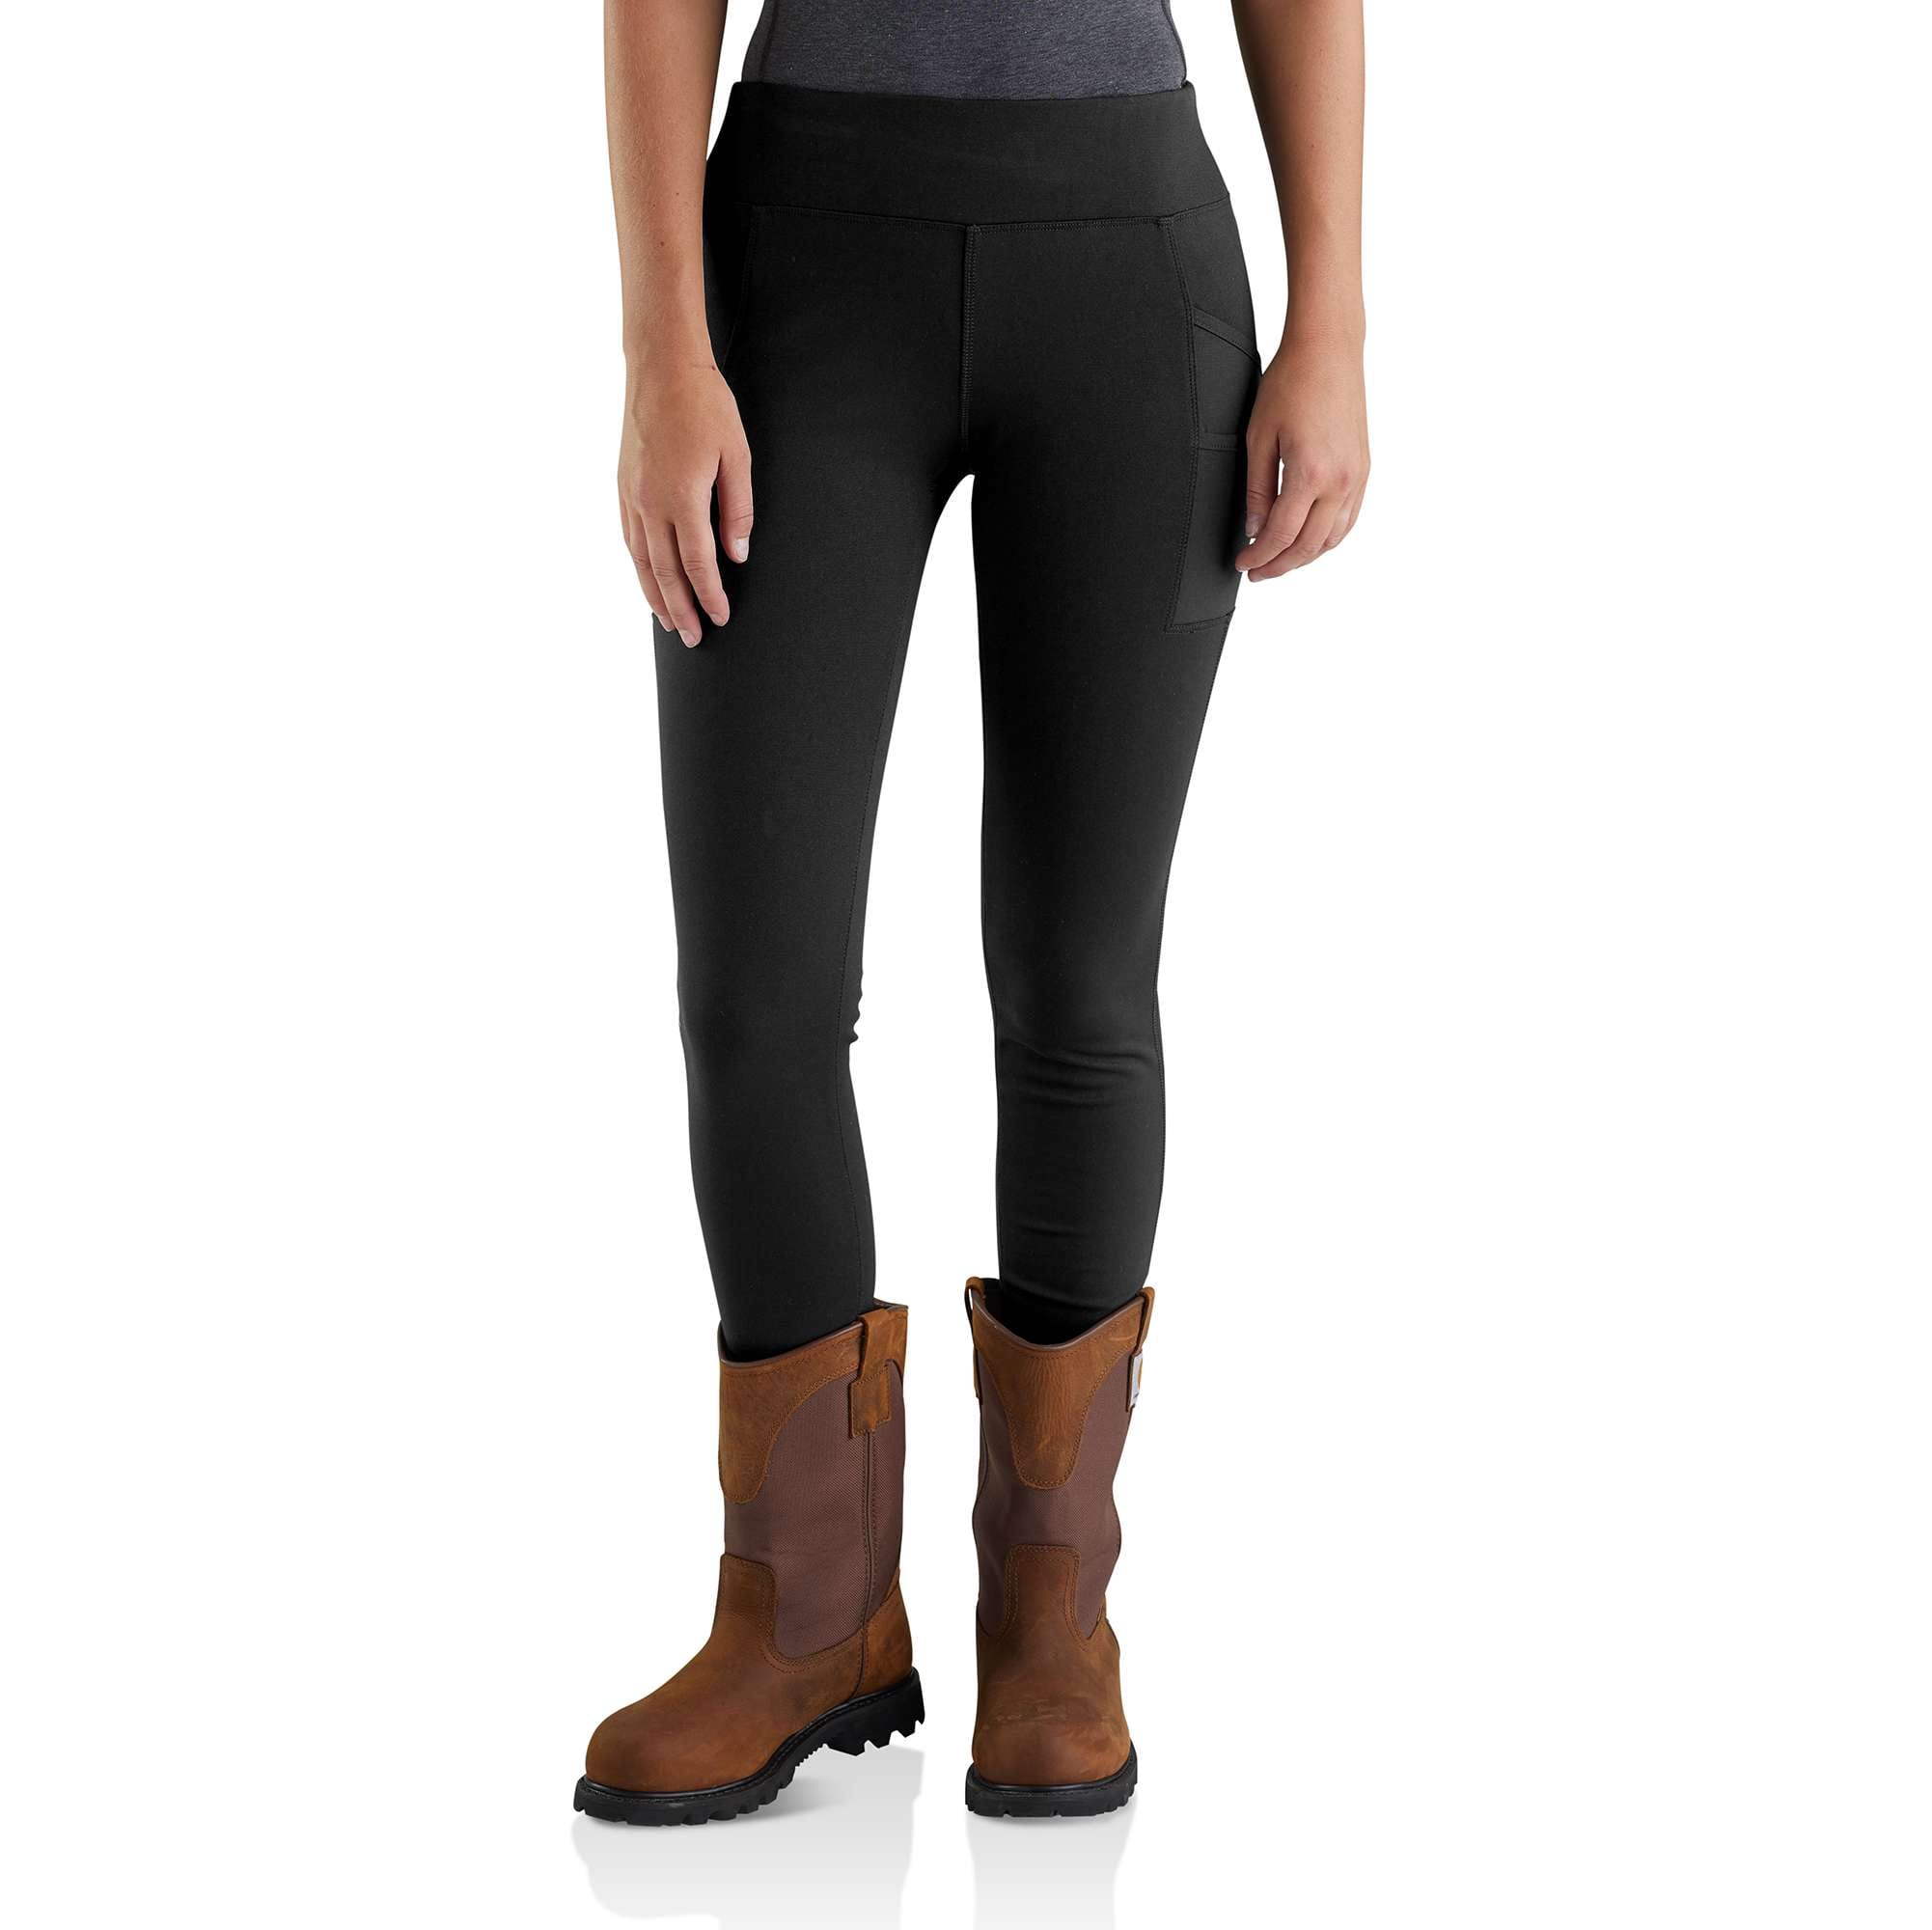 Carhartt® Women's Force Fitted Lightweight Cropped Legging, Black -  105321-001